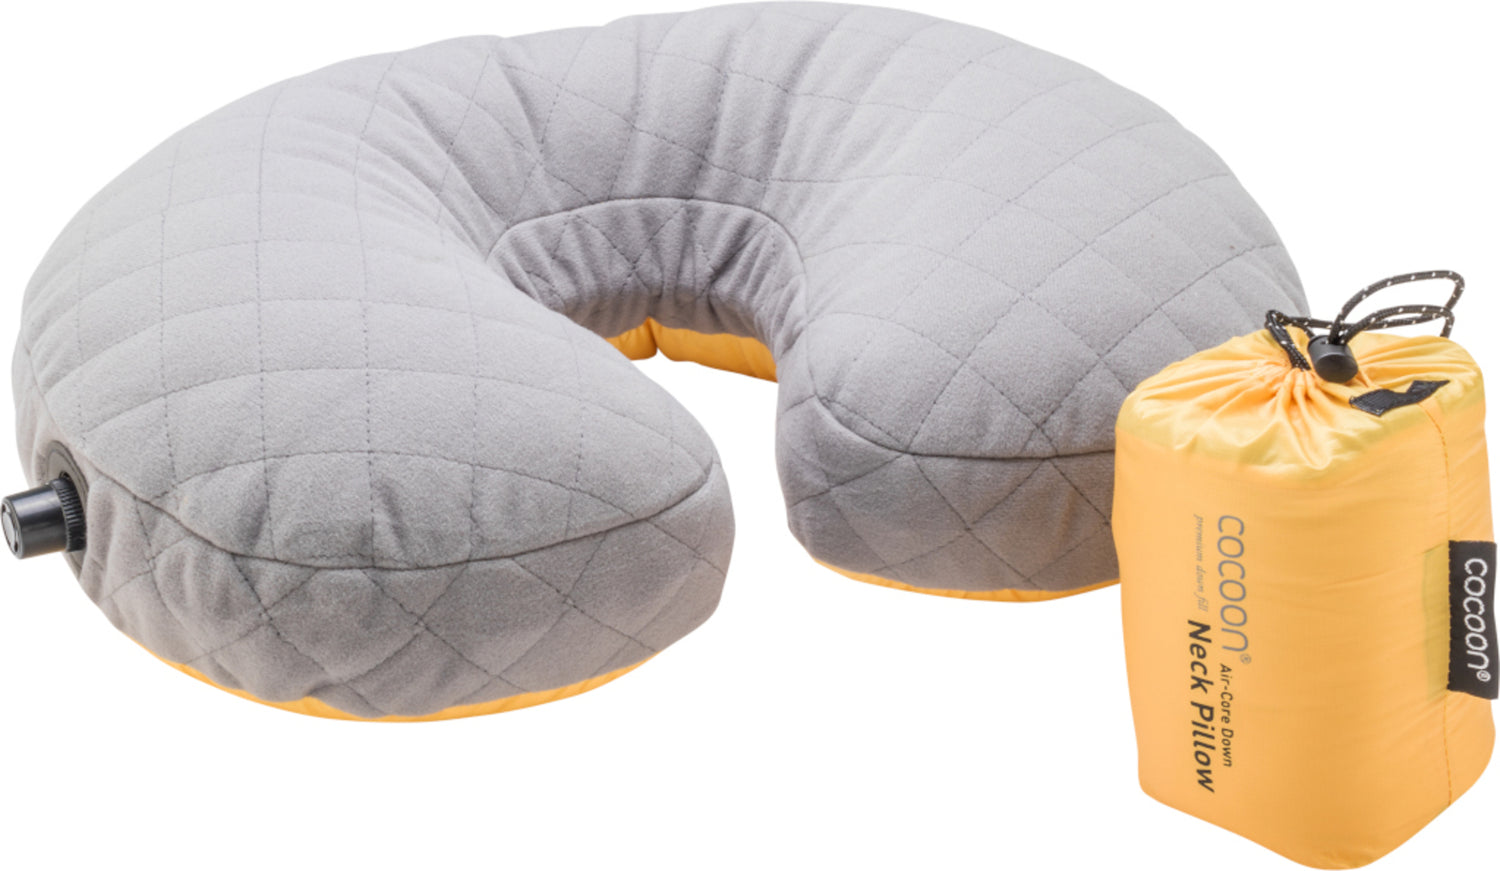 Cocoon U Shaped Down Neck Pillow sunflower/grey